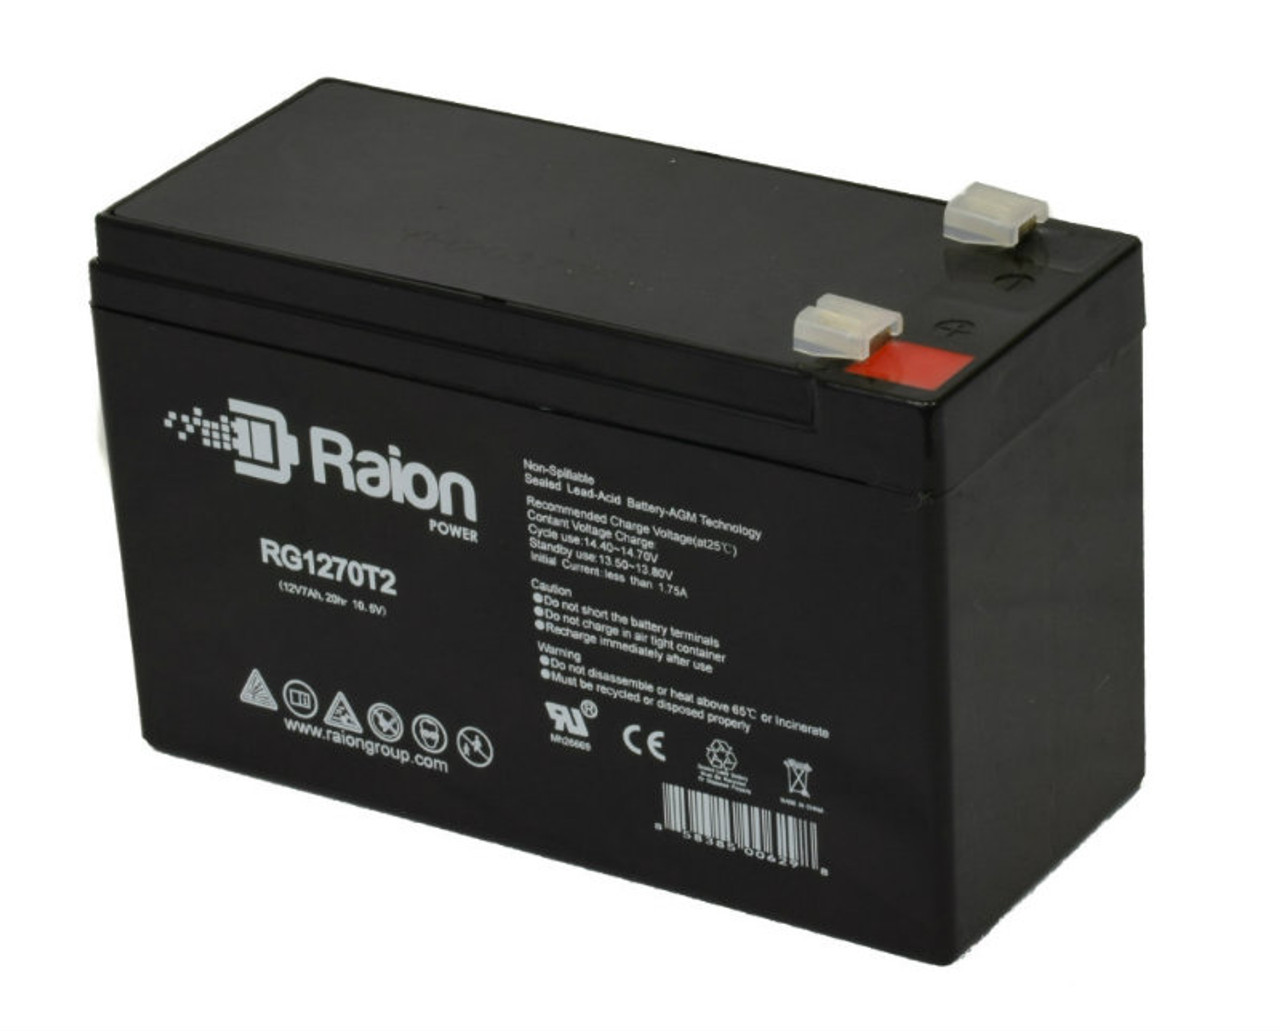 Raion Power Replacement 12V 7Ah RG1270T1 Fire Alarm Battery for Altronix SMP3PMCTX